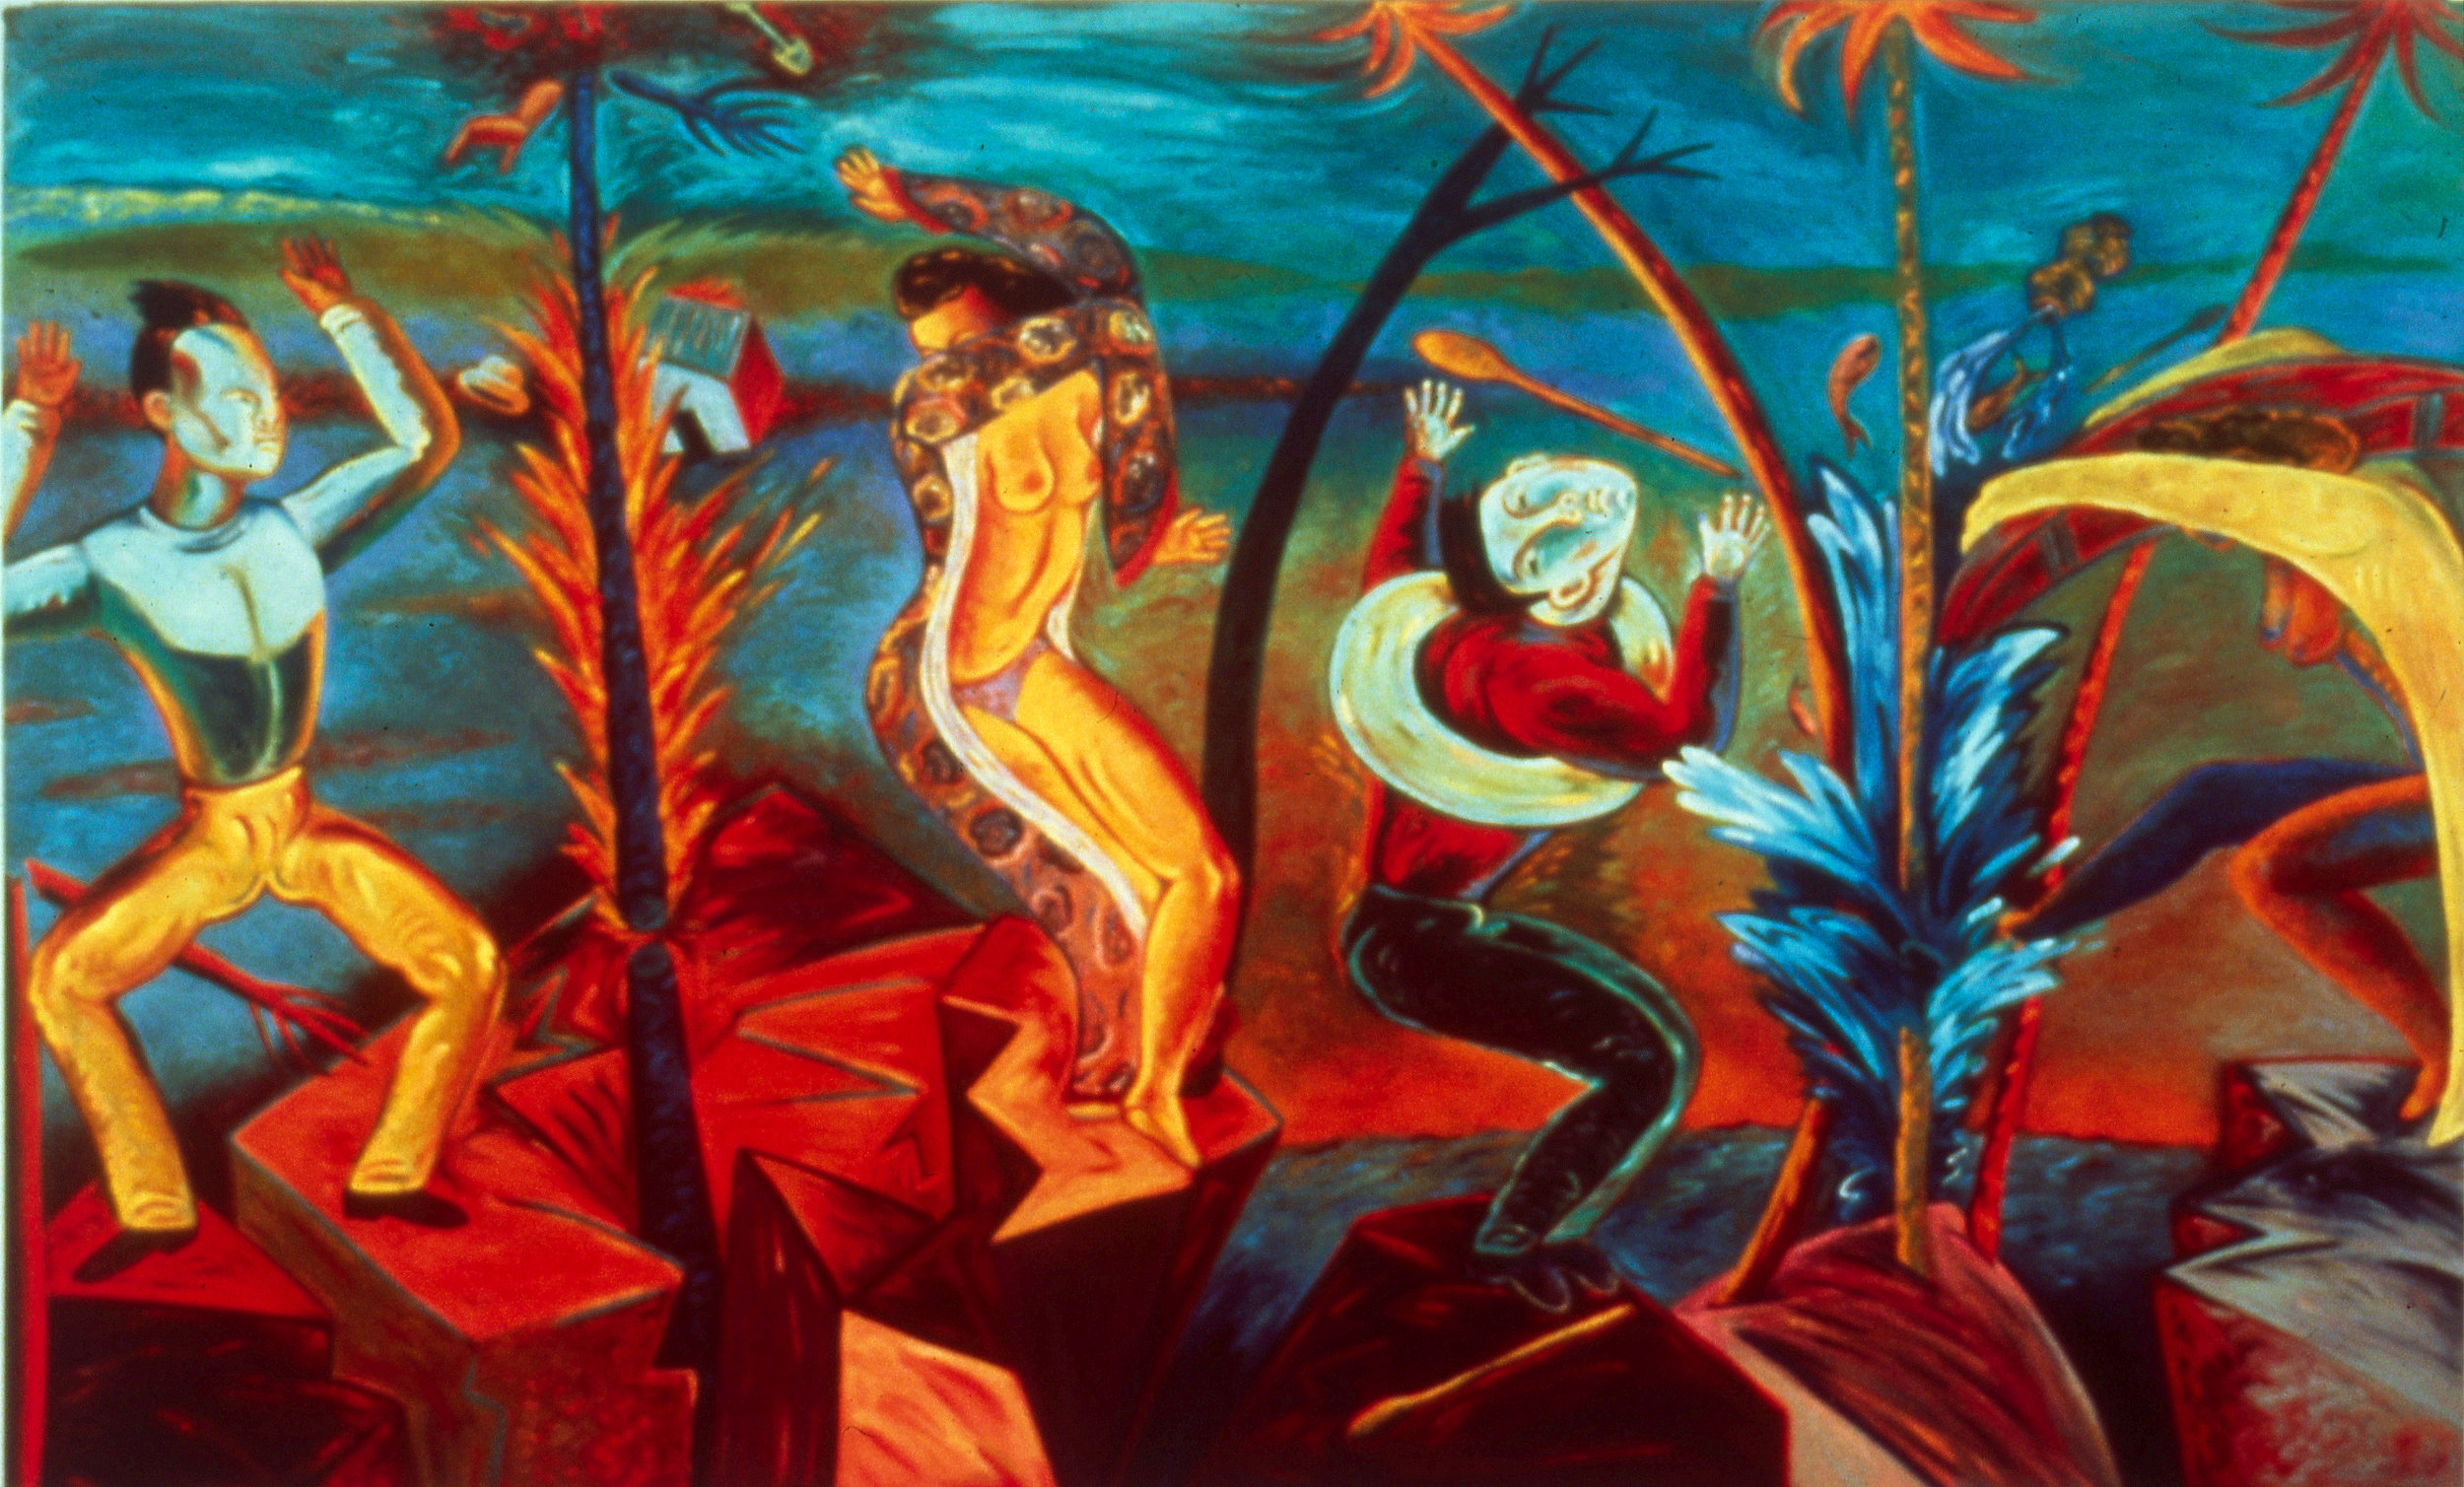 Fire and Water, 60" × 96", oil on canvas, 1987